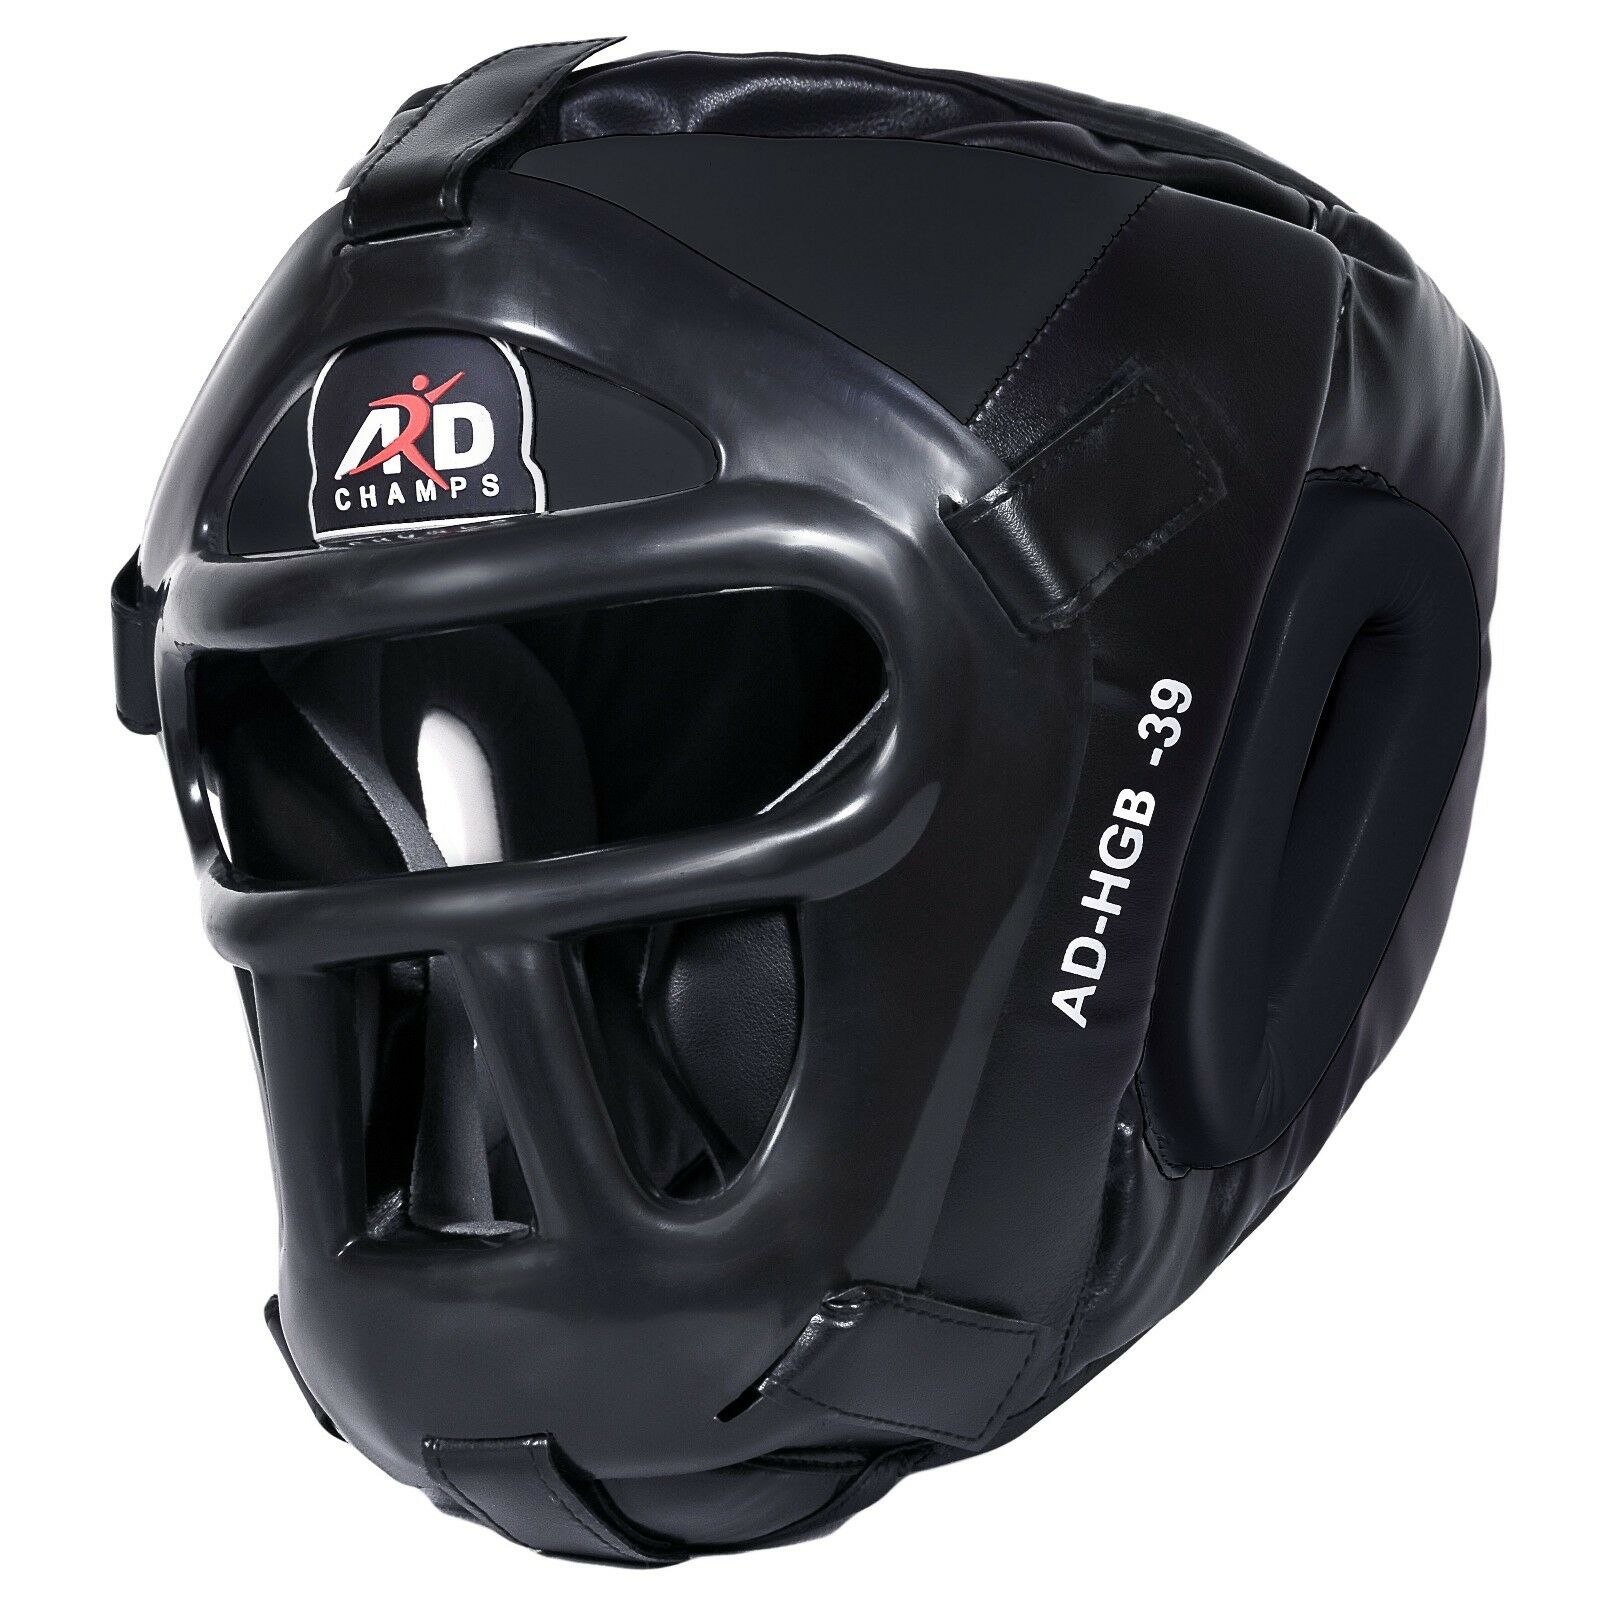 Ard Champs™ Protector Guard Wrestling Helmet Head Gear Boxing Mma Rugby- Black